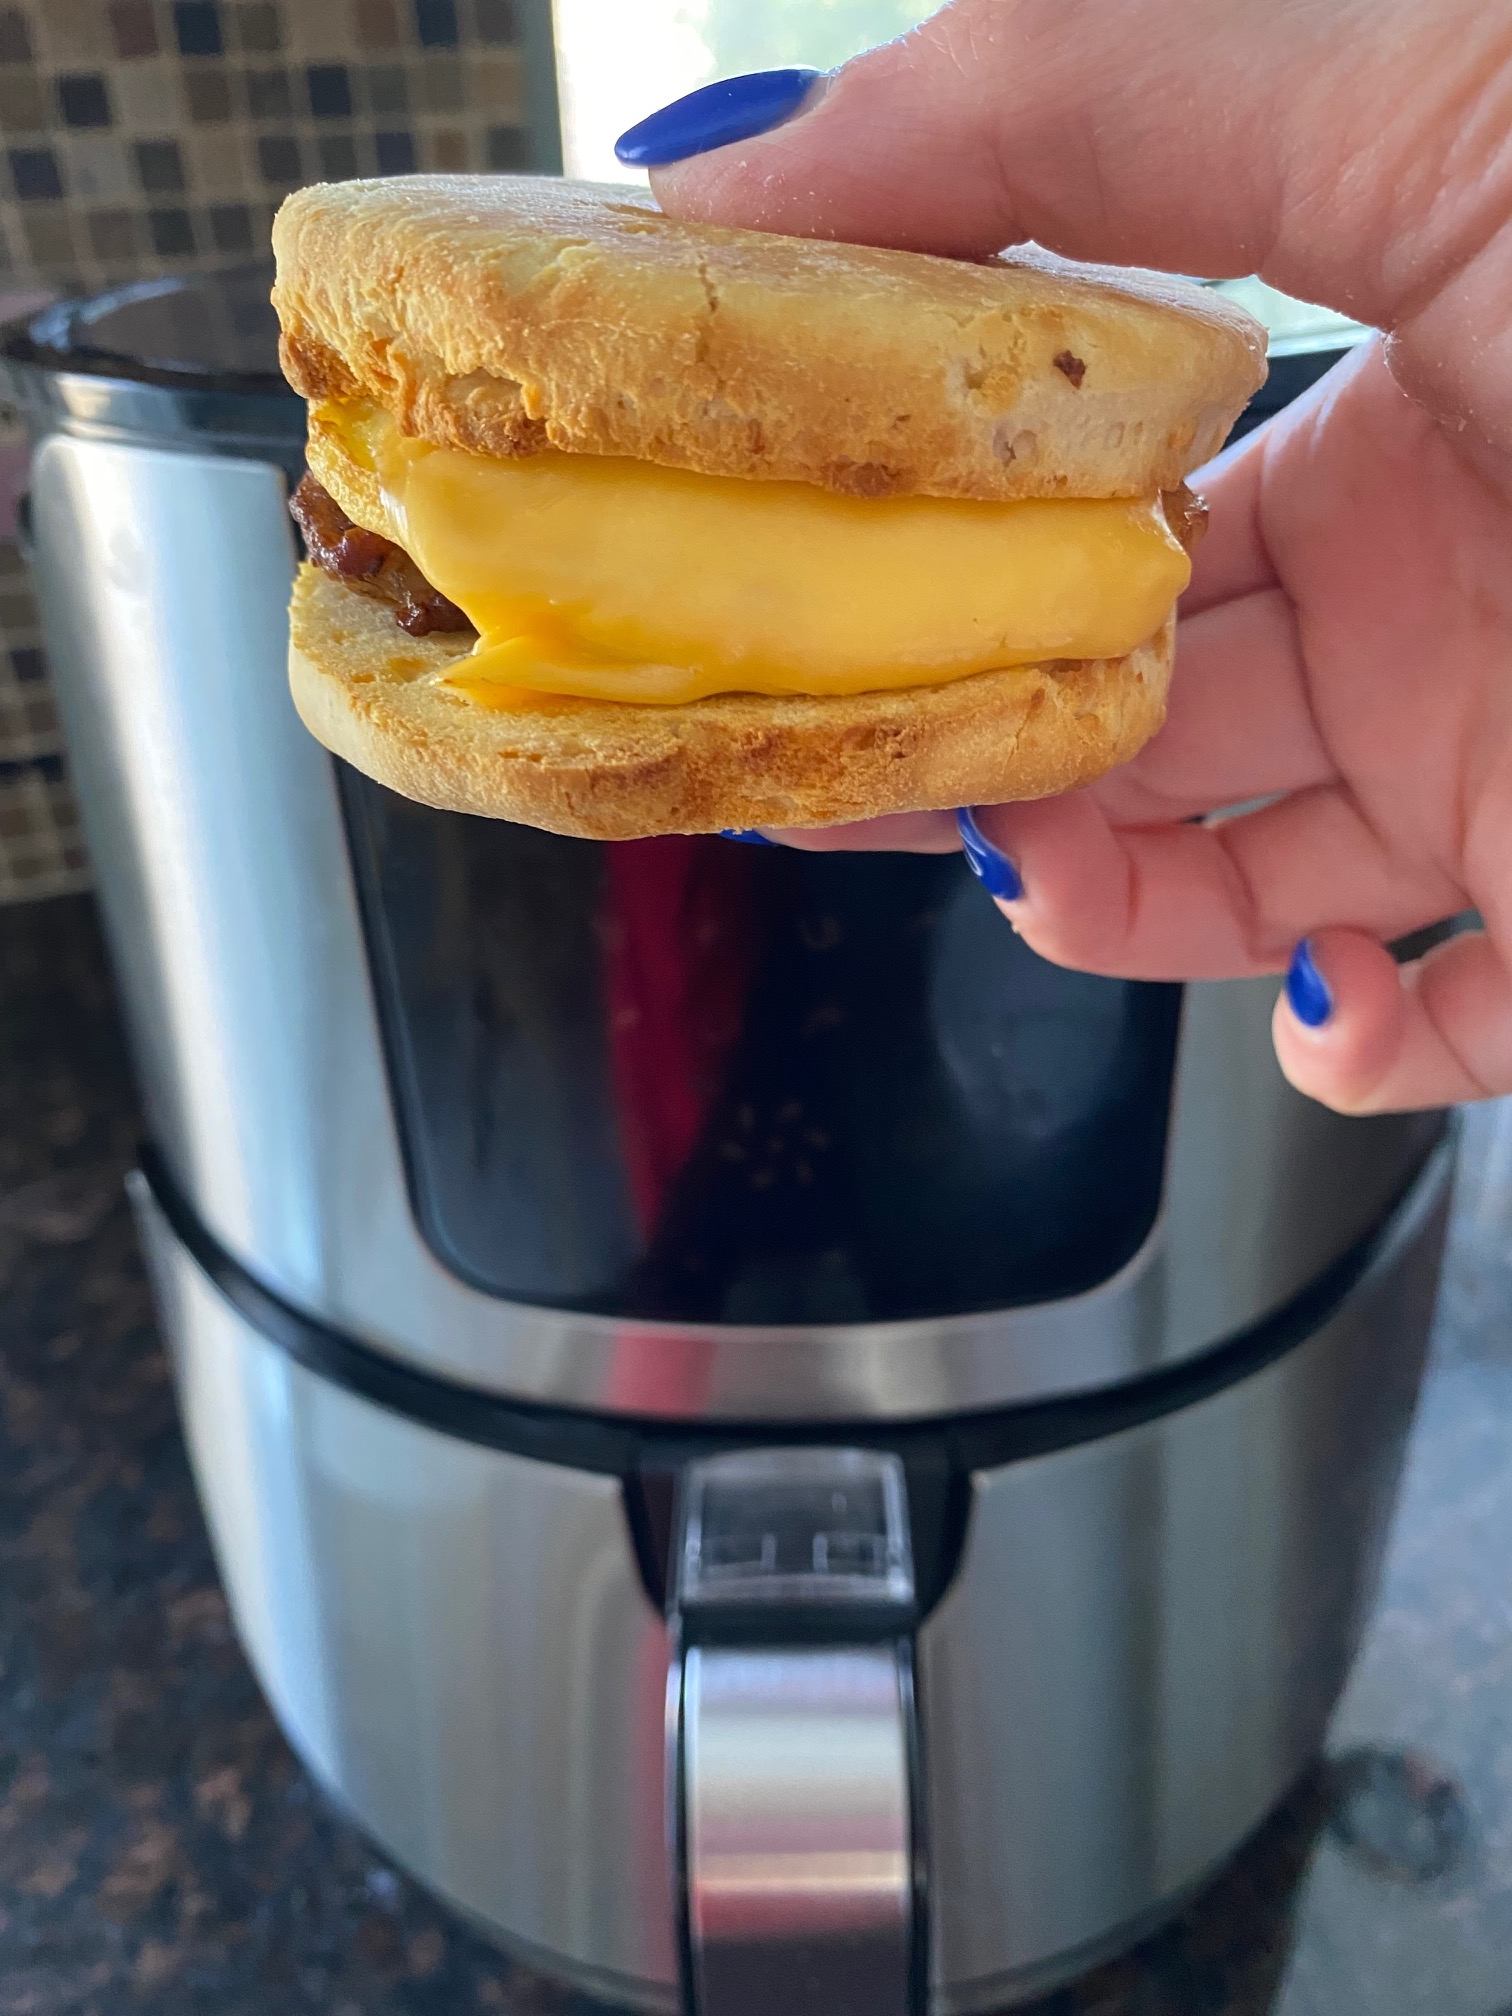 You can now get an all-in-one breakfast sandwich maker from